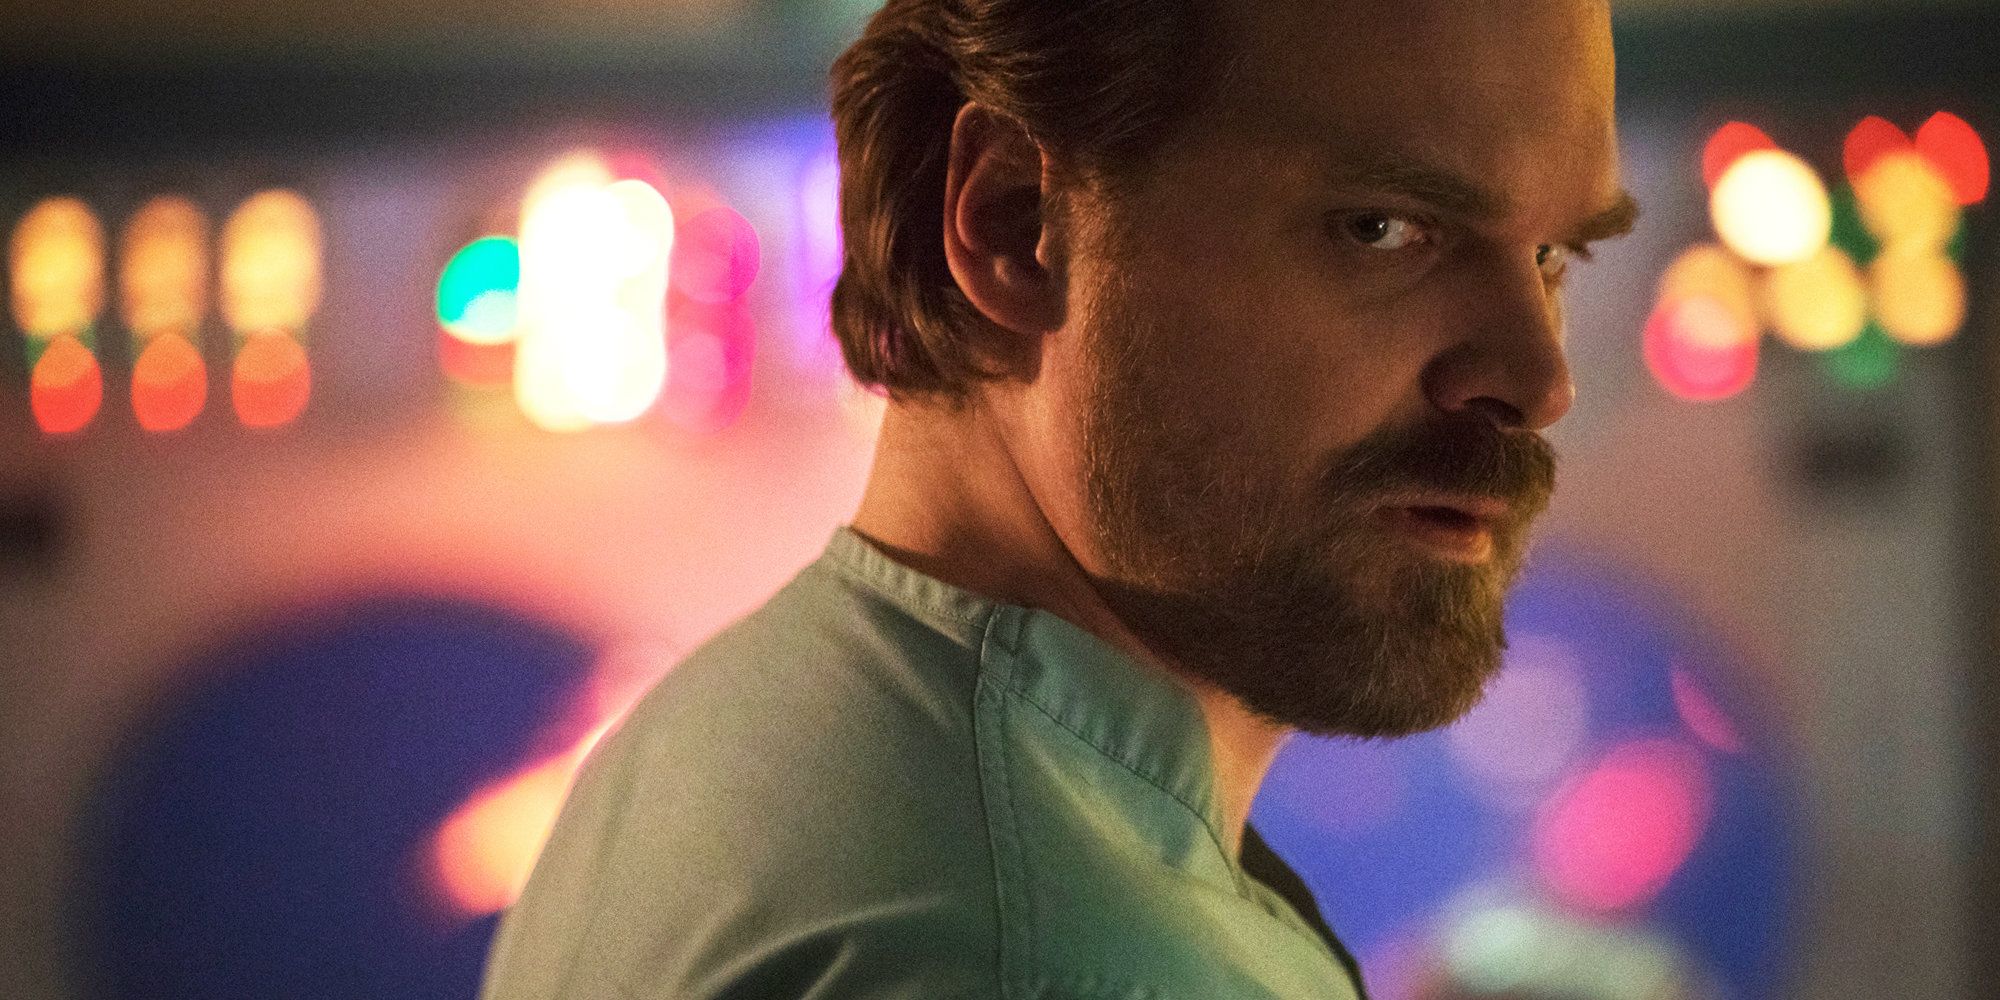 David Harbour Stranger Things Has An End to the Story